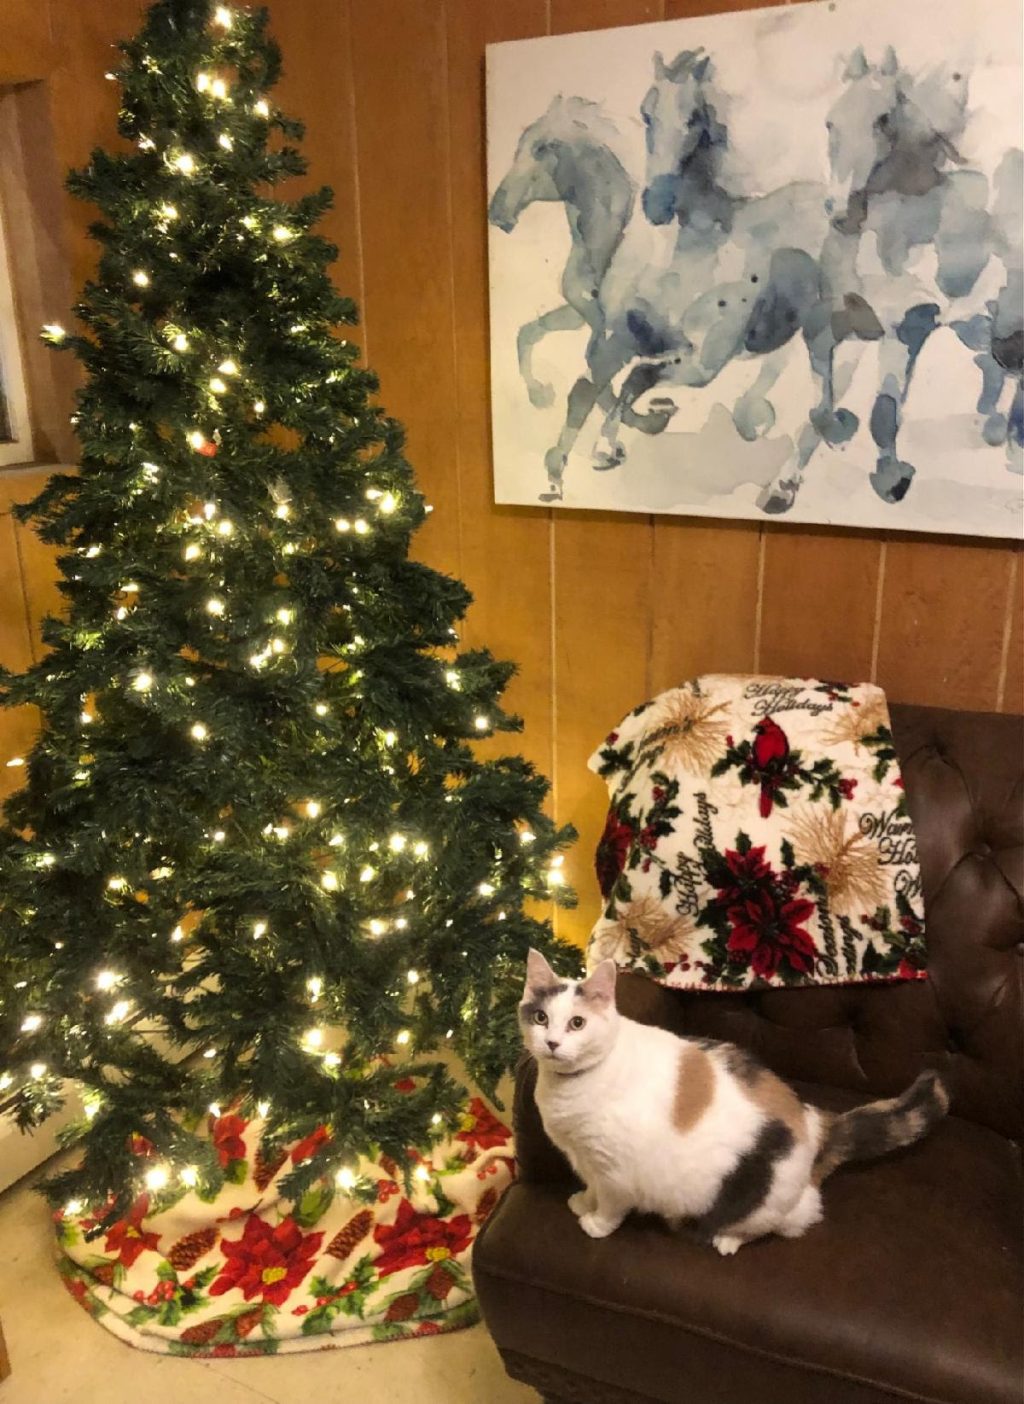 A Christmas tree in the tack room of our horse barn of the Lily Pond Sanctuary